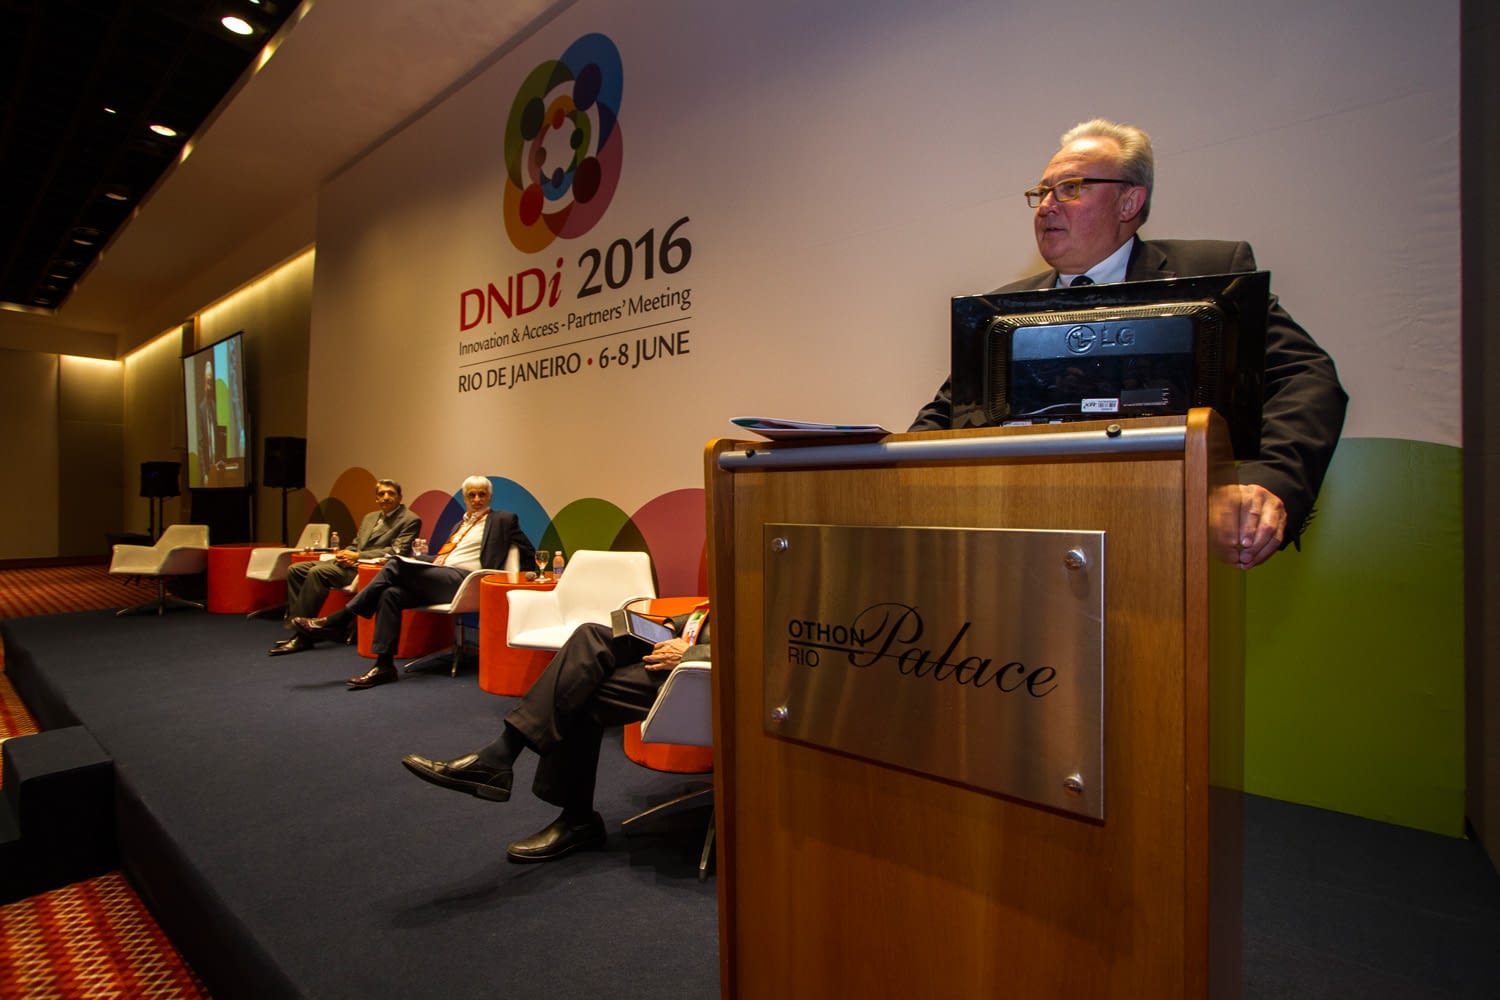 Prof Marcel Tanner addressing the participants during the Opening Ceremony, Partner Meeting, Rio, Brazil 2016